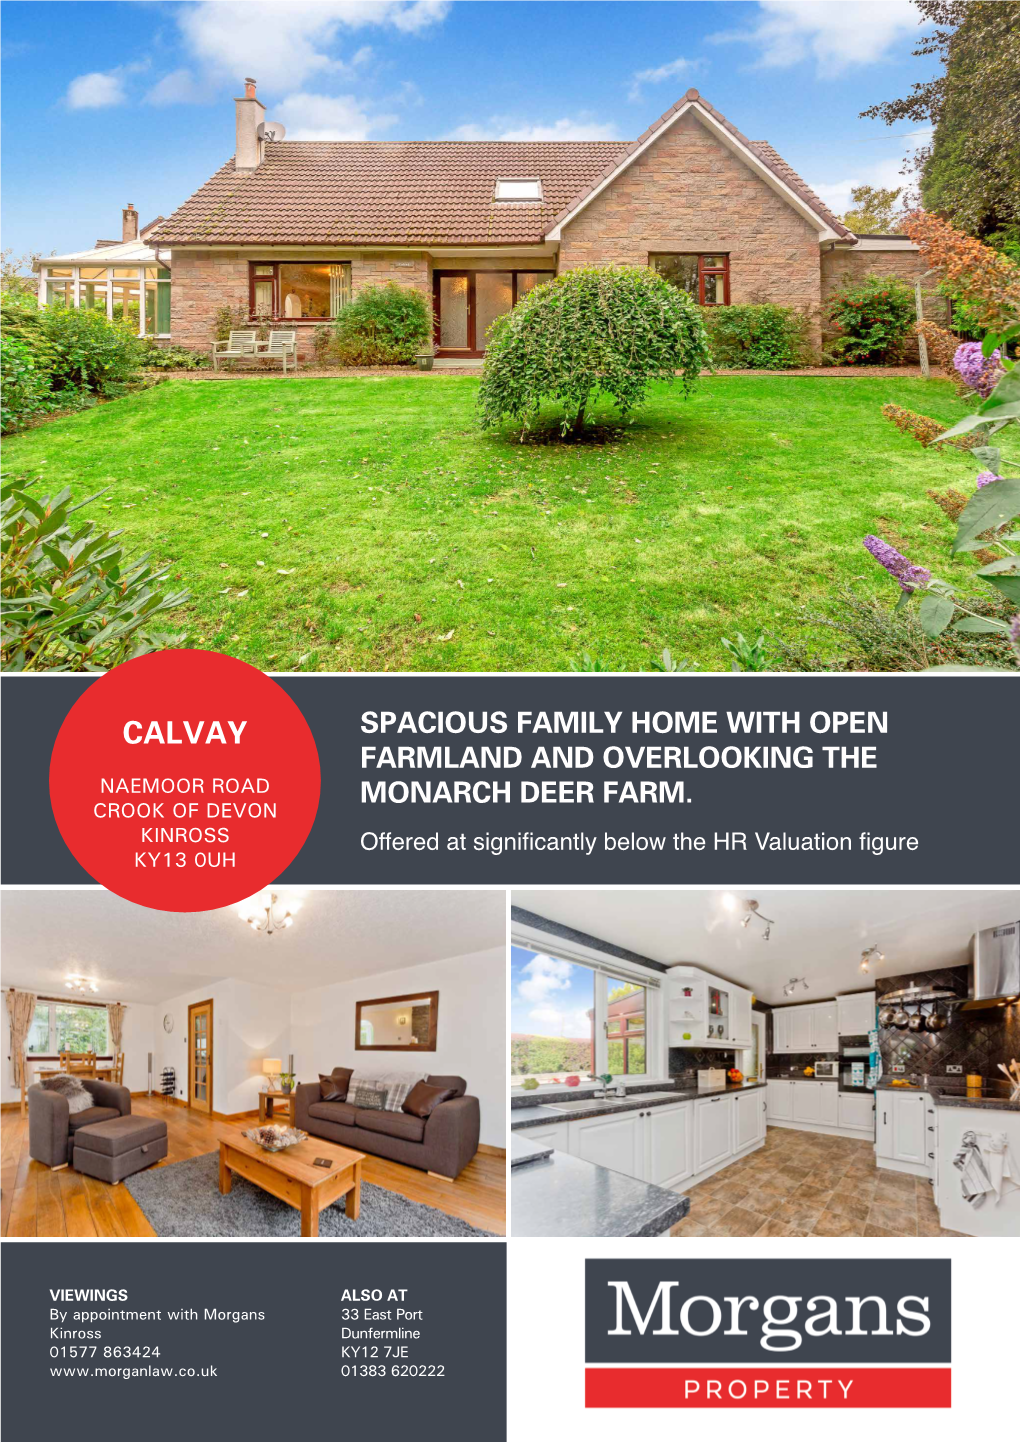 Calvay Spacious Family Home with Open Farmland and Overlooking the Naemoor Road Monarch Deer Farm